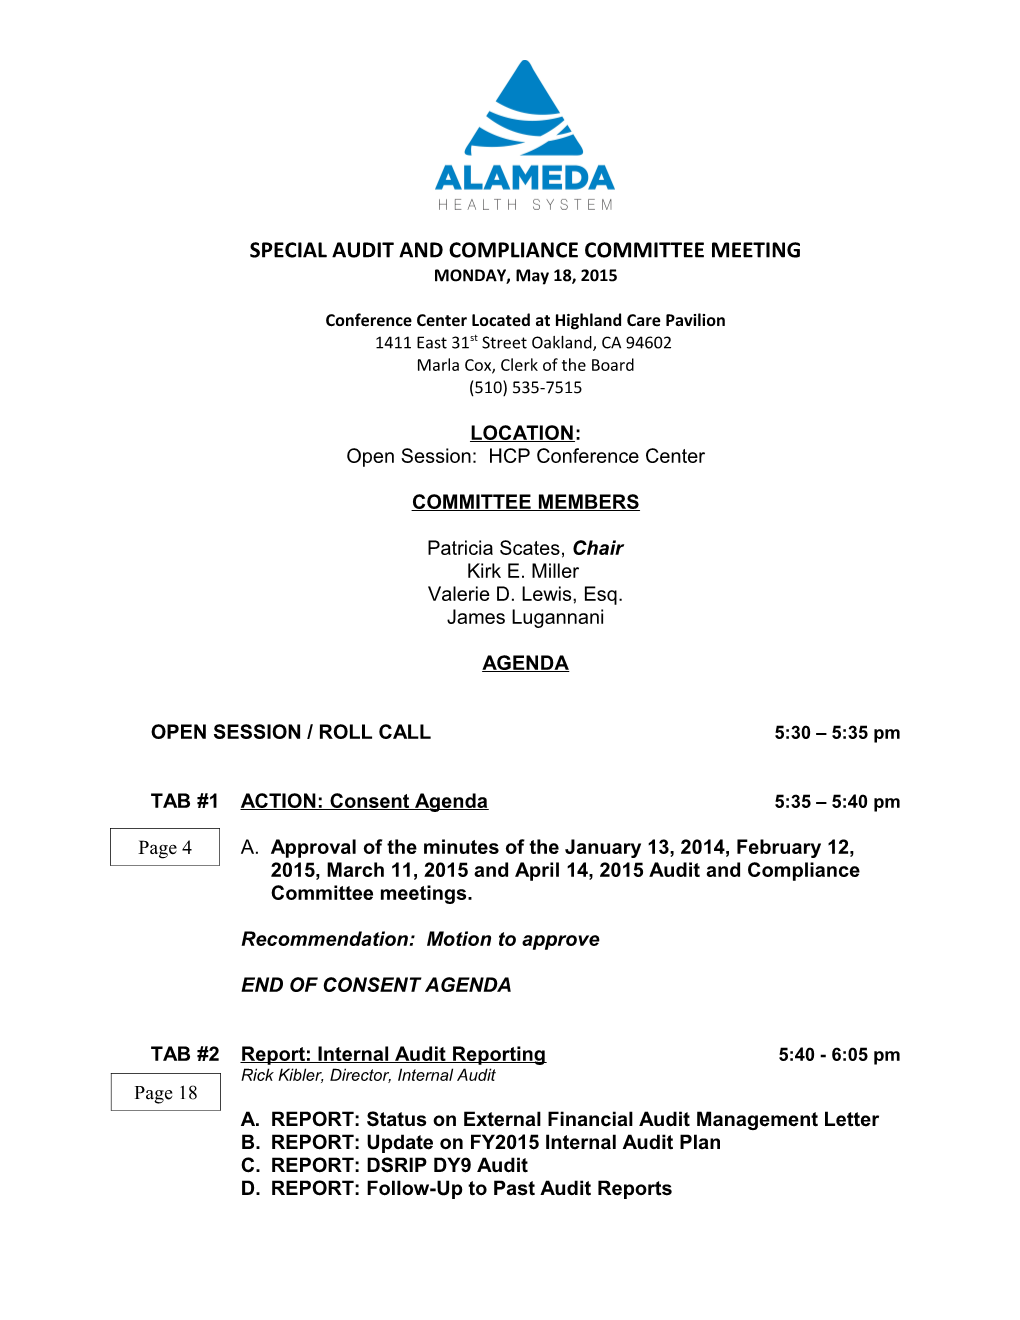 Board of Trustees Special Audit and Compliance Committee Meeting - Agenda